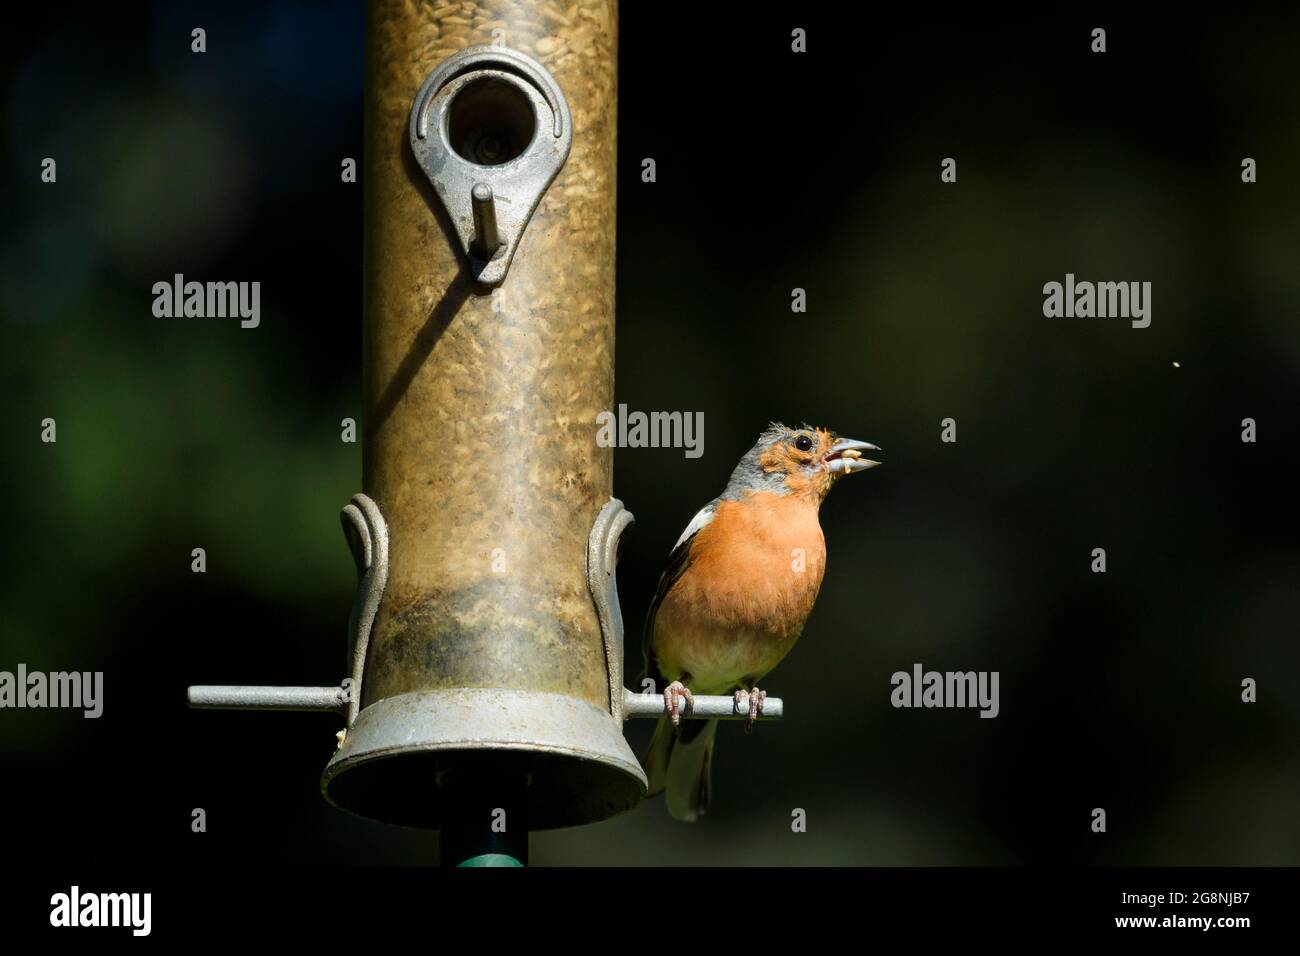 One sunlit adult male chaffinch (colourful plumage) sitting perched on garden bird feeder (sunflower seed in its beak) - West Yorkshire, England, UK. Stock Photo